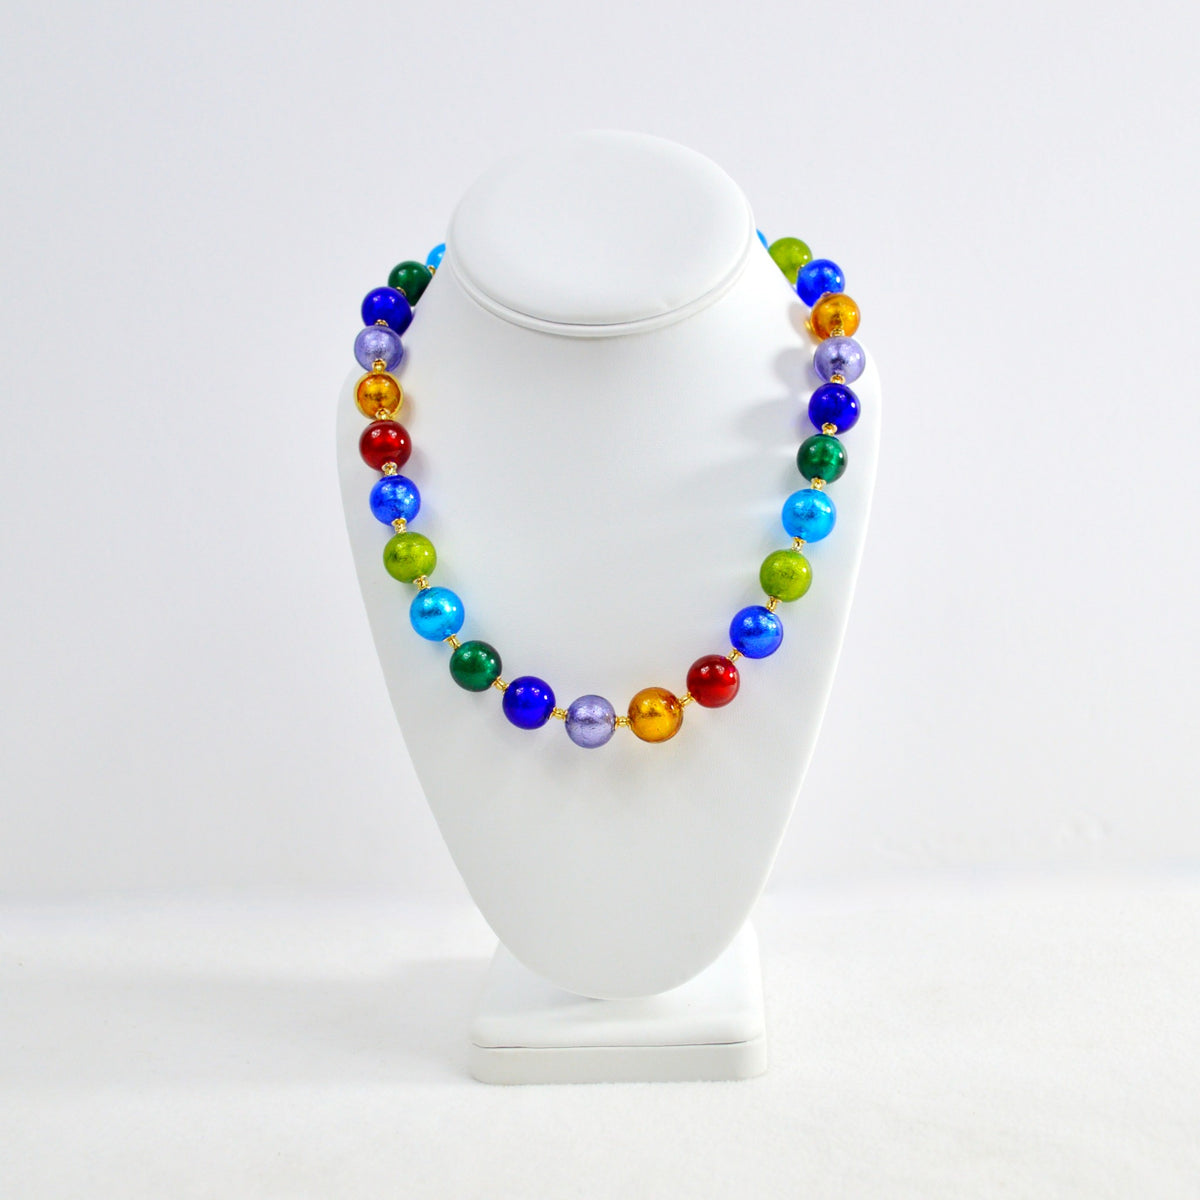 Diva Murano Glass Beaded Necklace, Multi-Color Glass Beads, Handcrafted In Italy - My Italian Decor